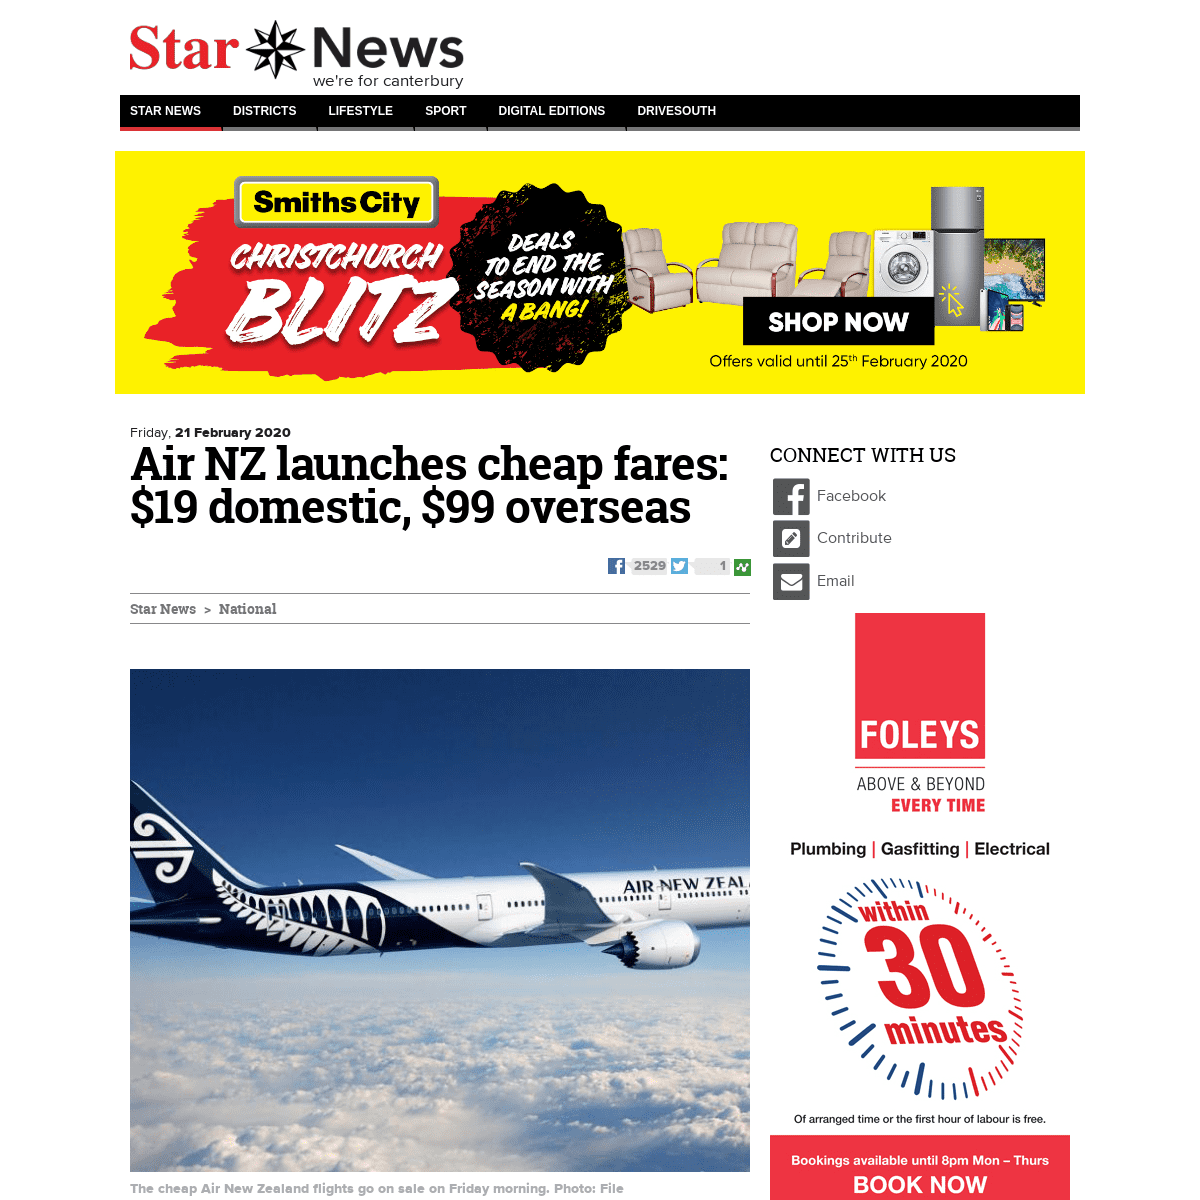 A complete backup of www.odt.co.nz/star-news/star-national/air-nz-launches-cheap-fares-19-domestic-99-overseas